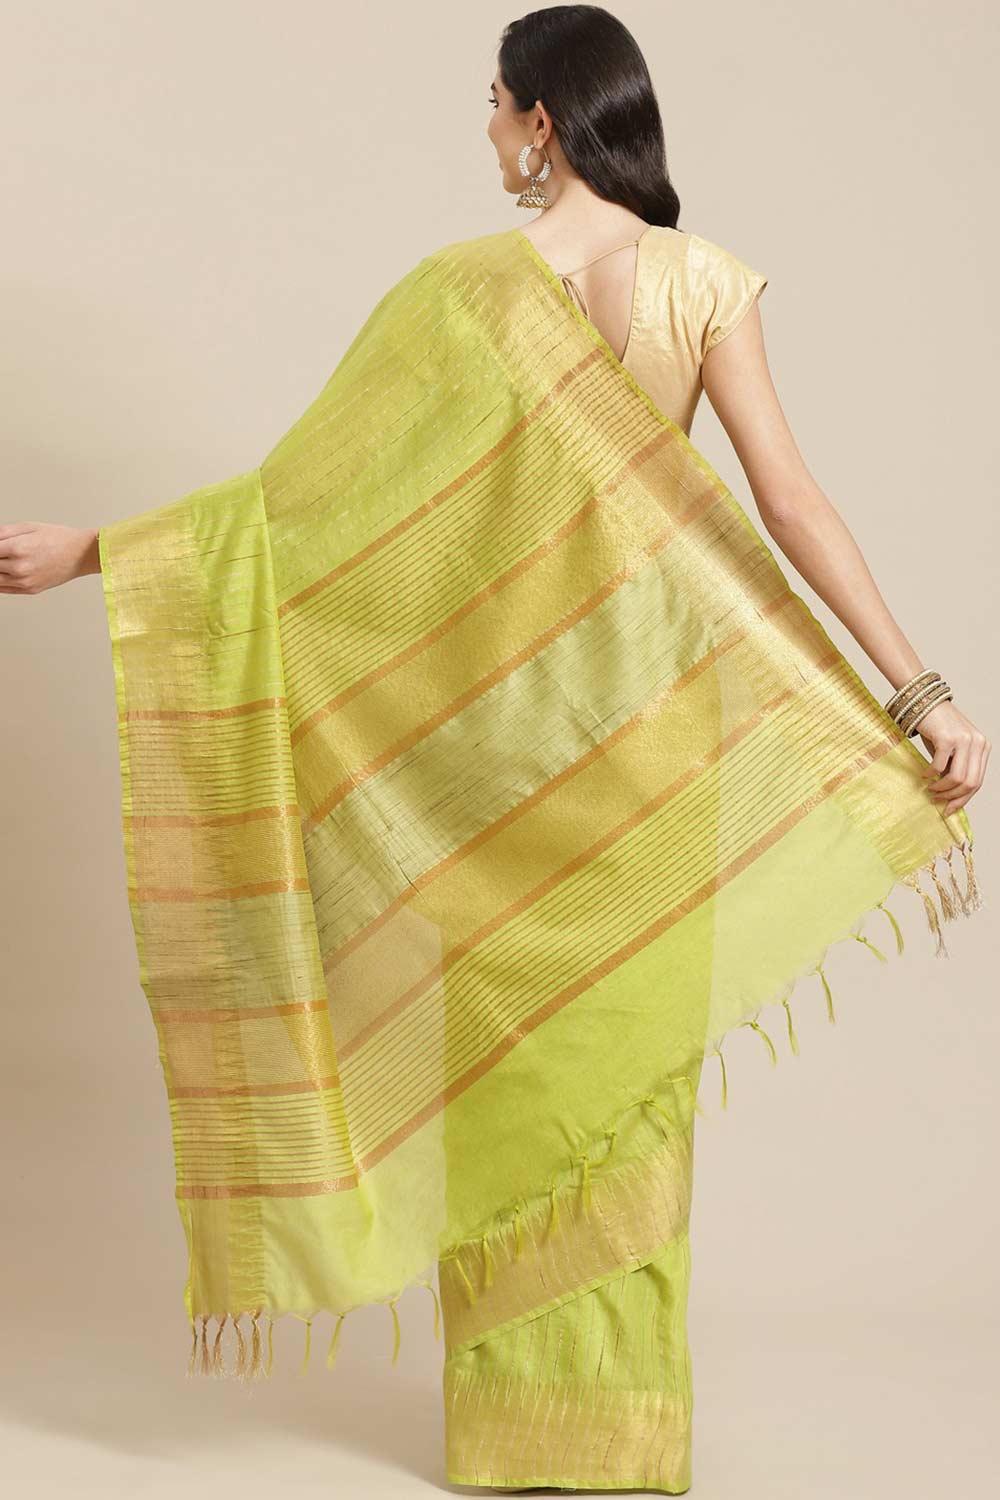 Shop Airana Light Green Zari Woven Blended Silk One Minute Saree at best offer at our  Store - One Minute Saree